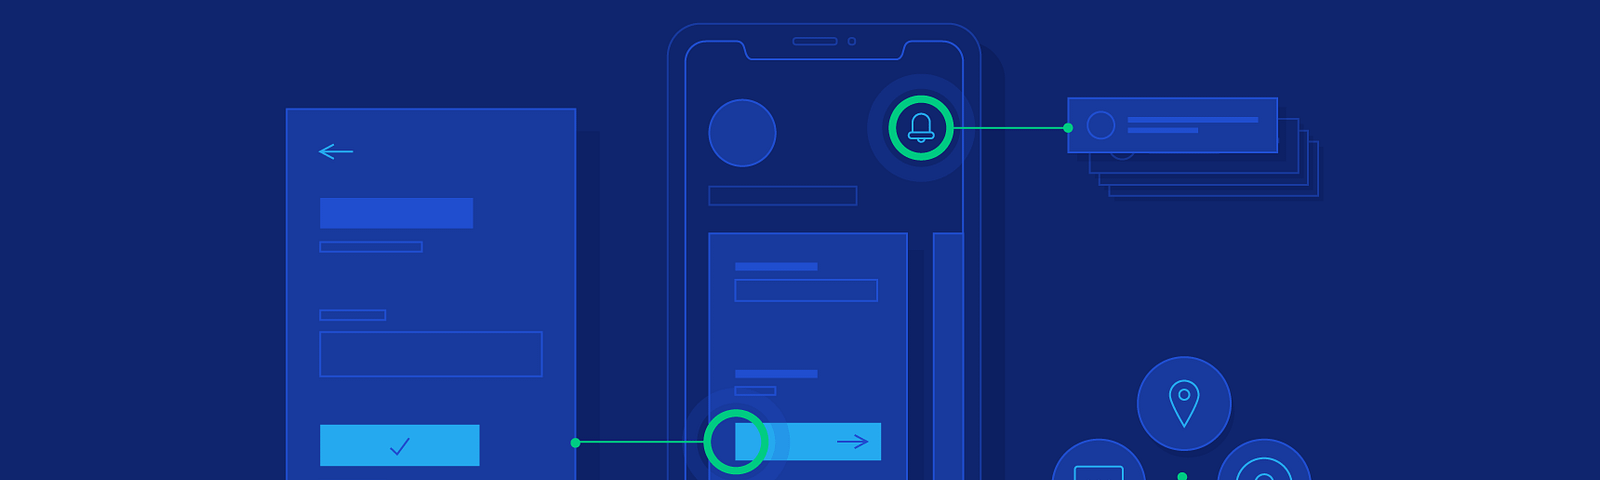 Boost UX with Mobile UX Design Principles and Best Practices